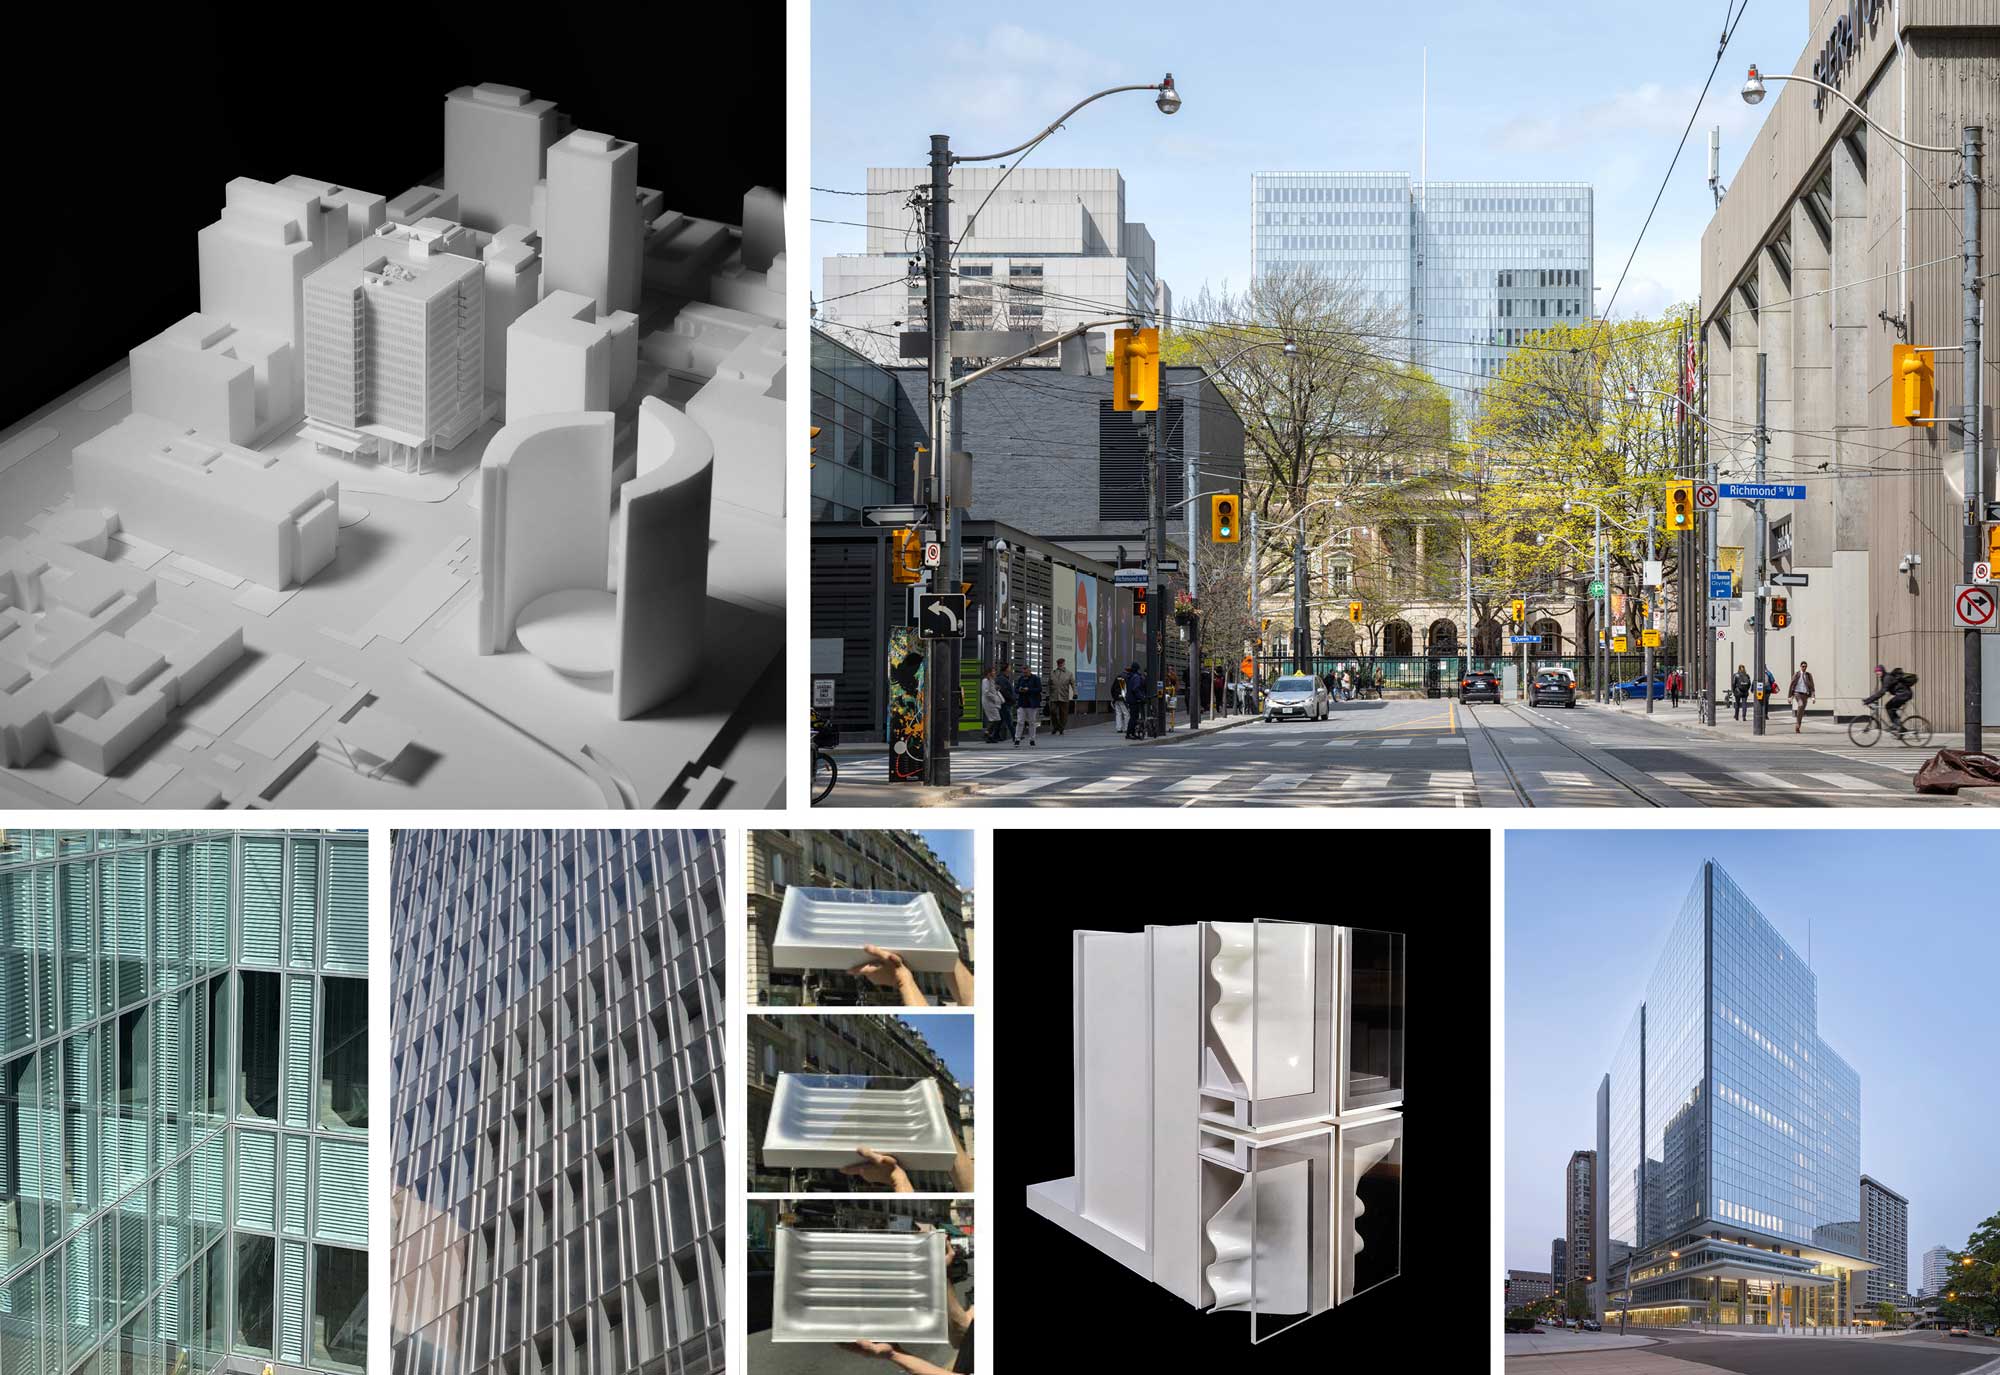 Collage of project, featuring images of building model, details, and exterior viewed from street